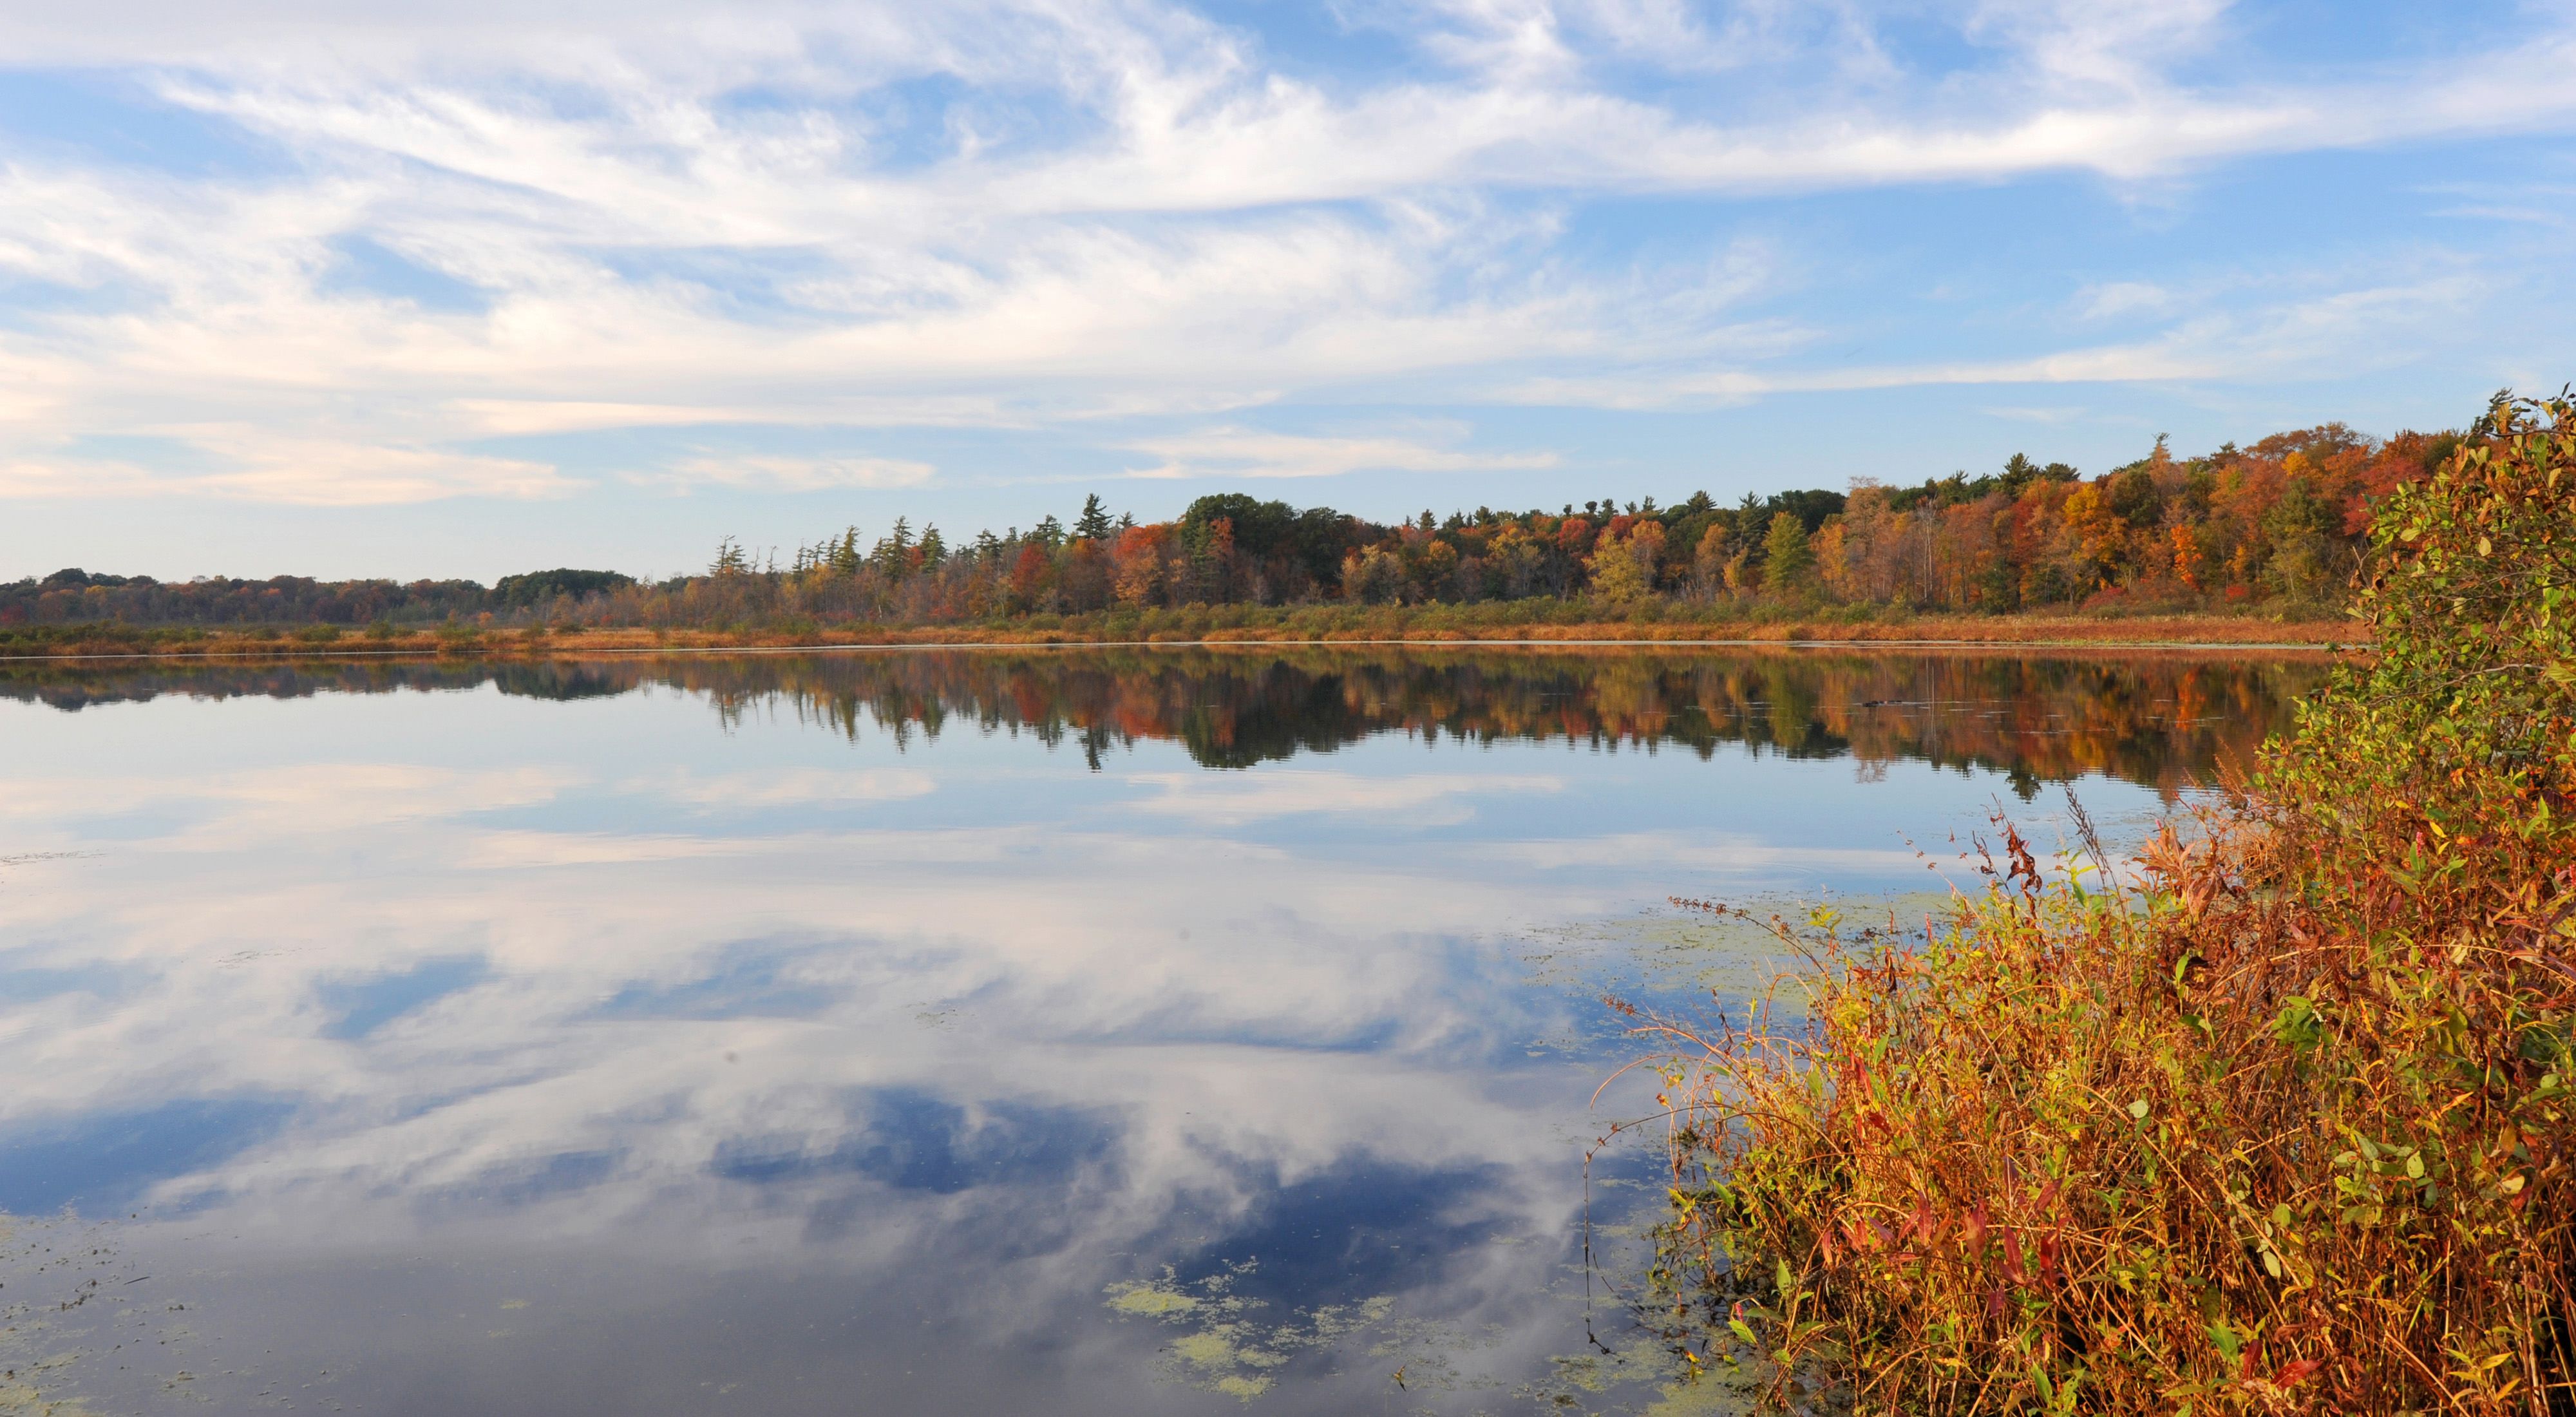 Clouds reflected in the surface of a lake surrounded by trees in fall color.